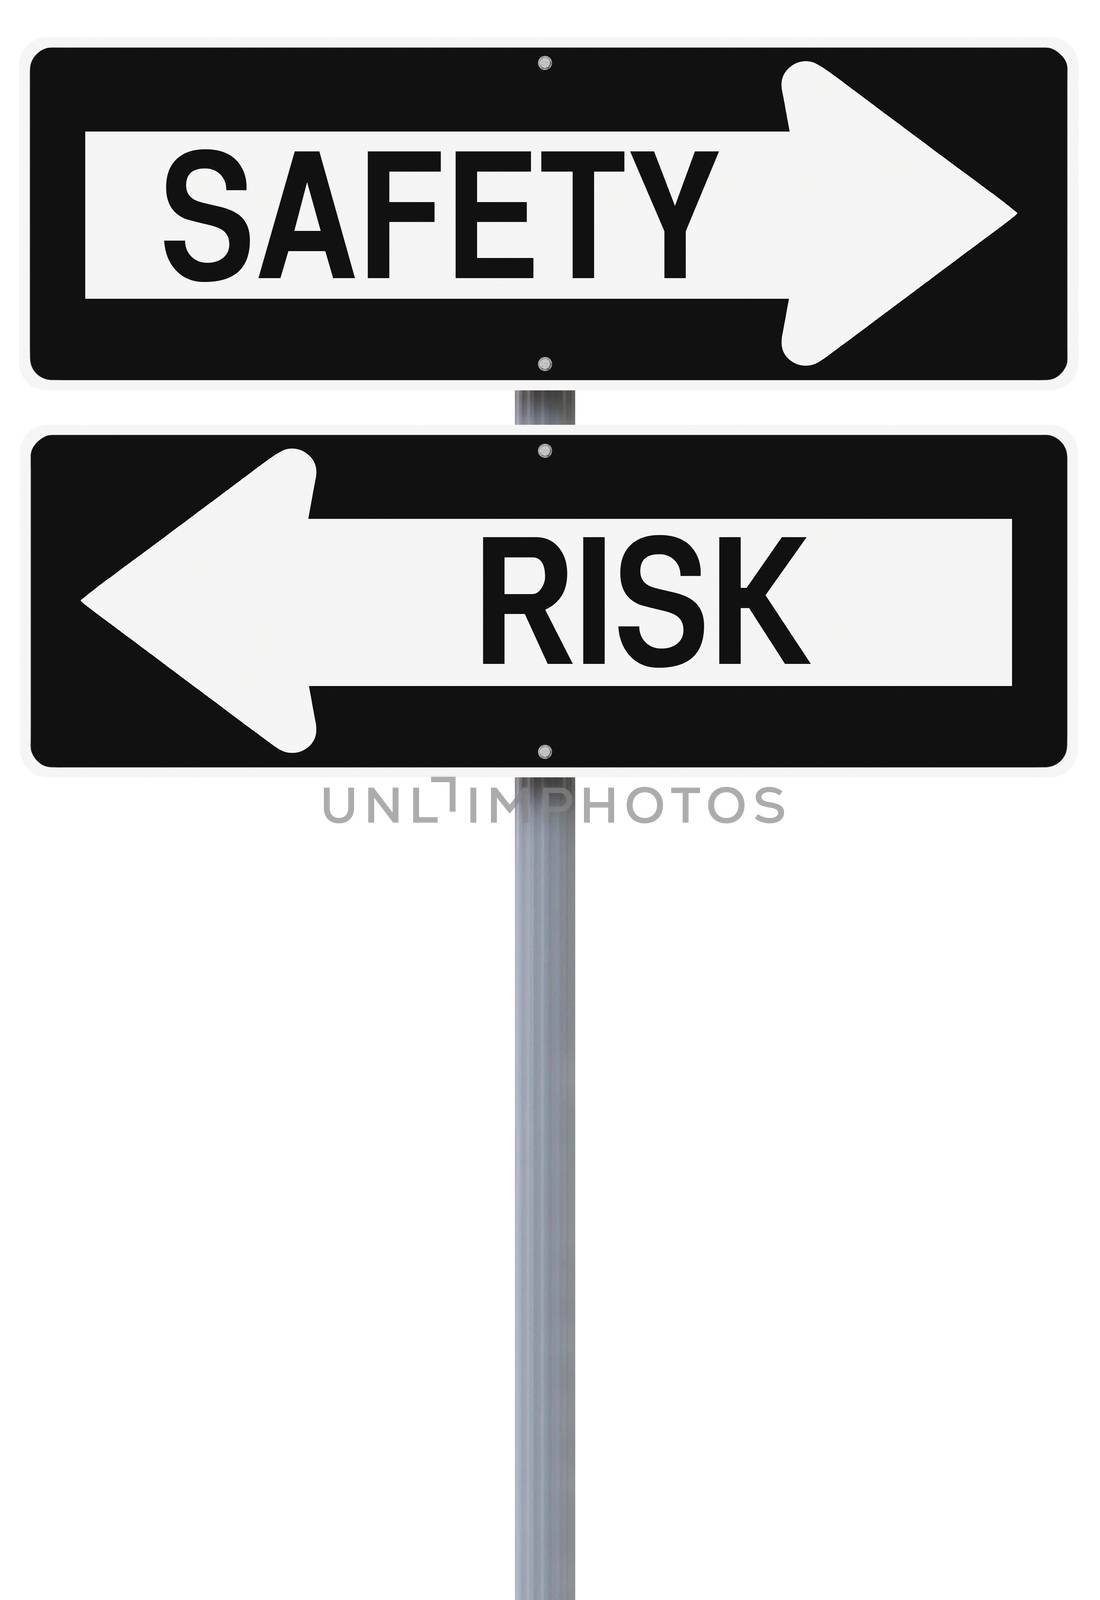 Conceptual one way street signs on safety and risk